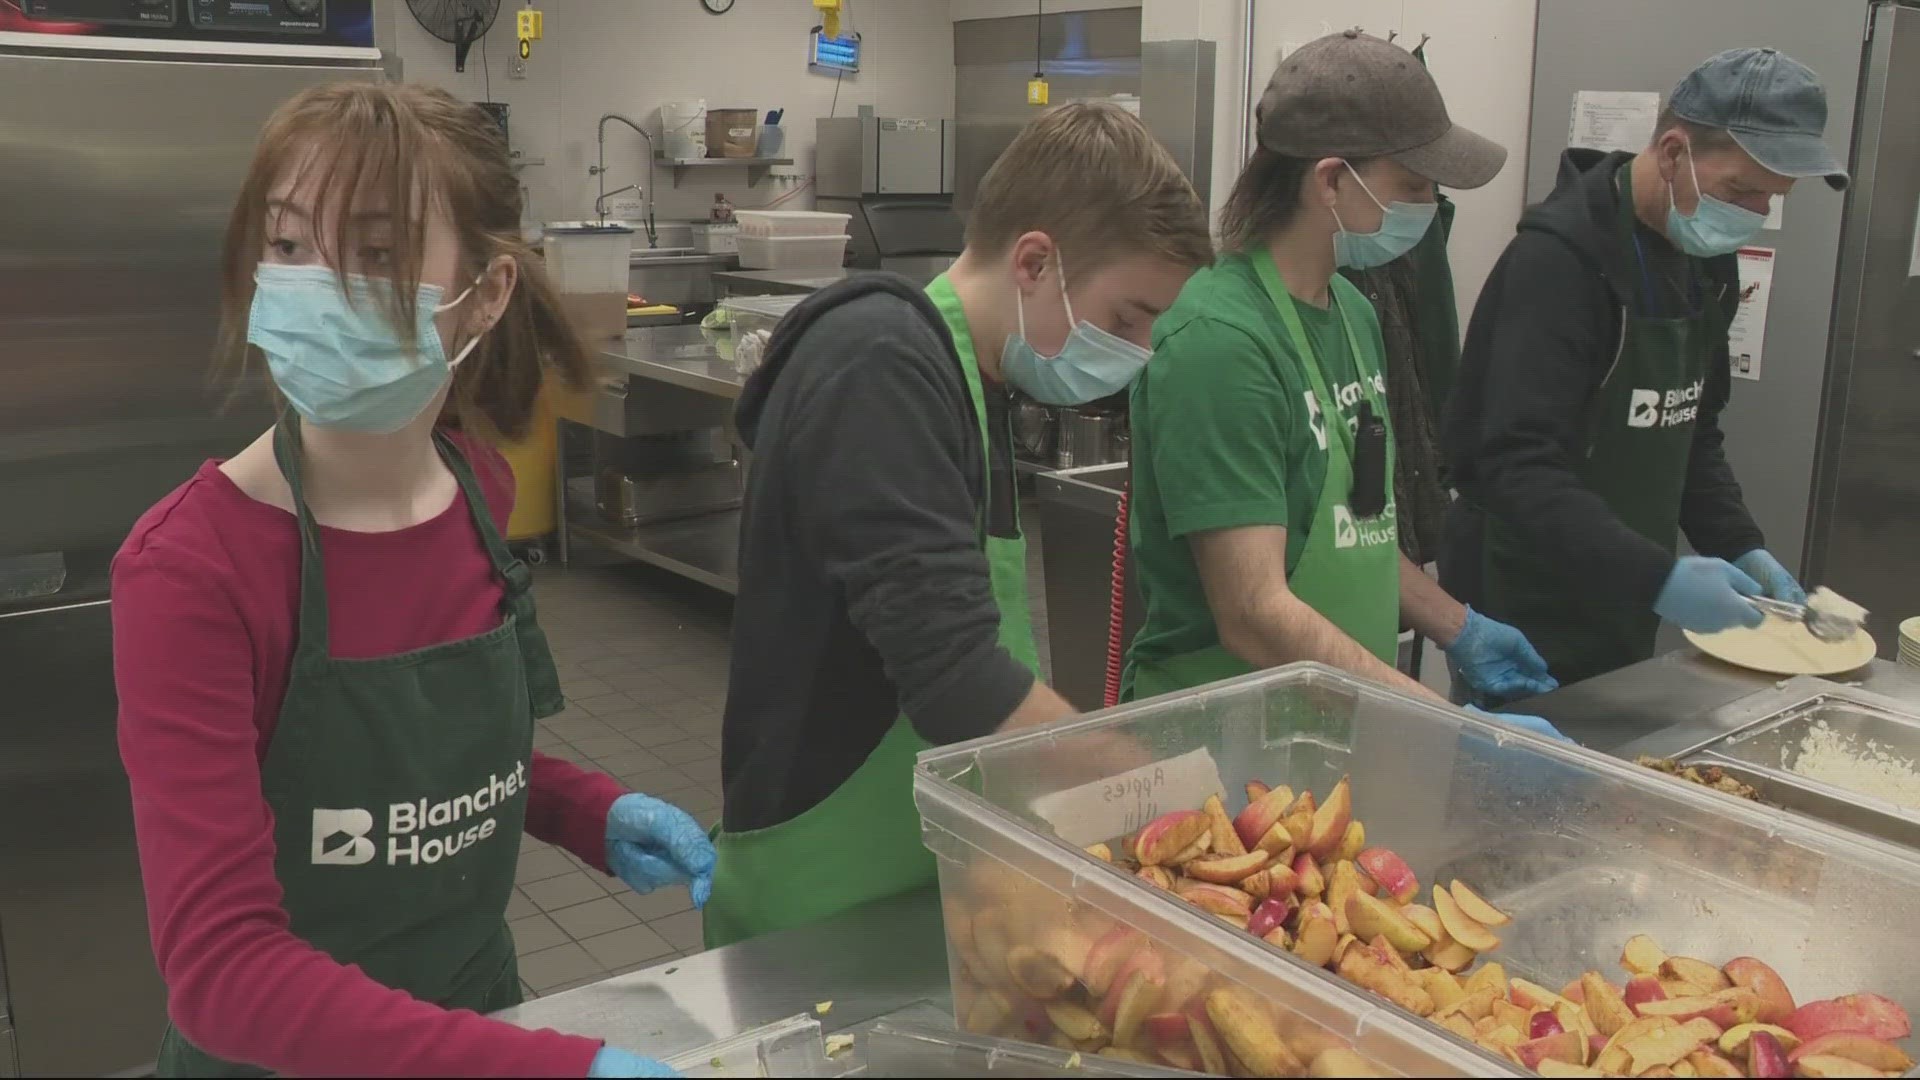 These Grant High students are volunteering at the Blanchet House’s kitchen.